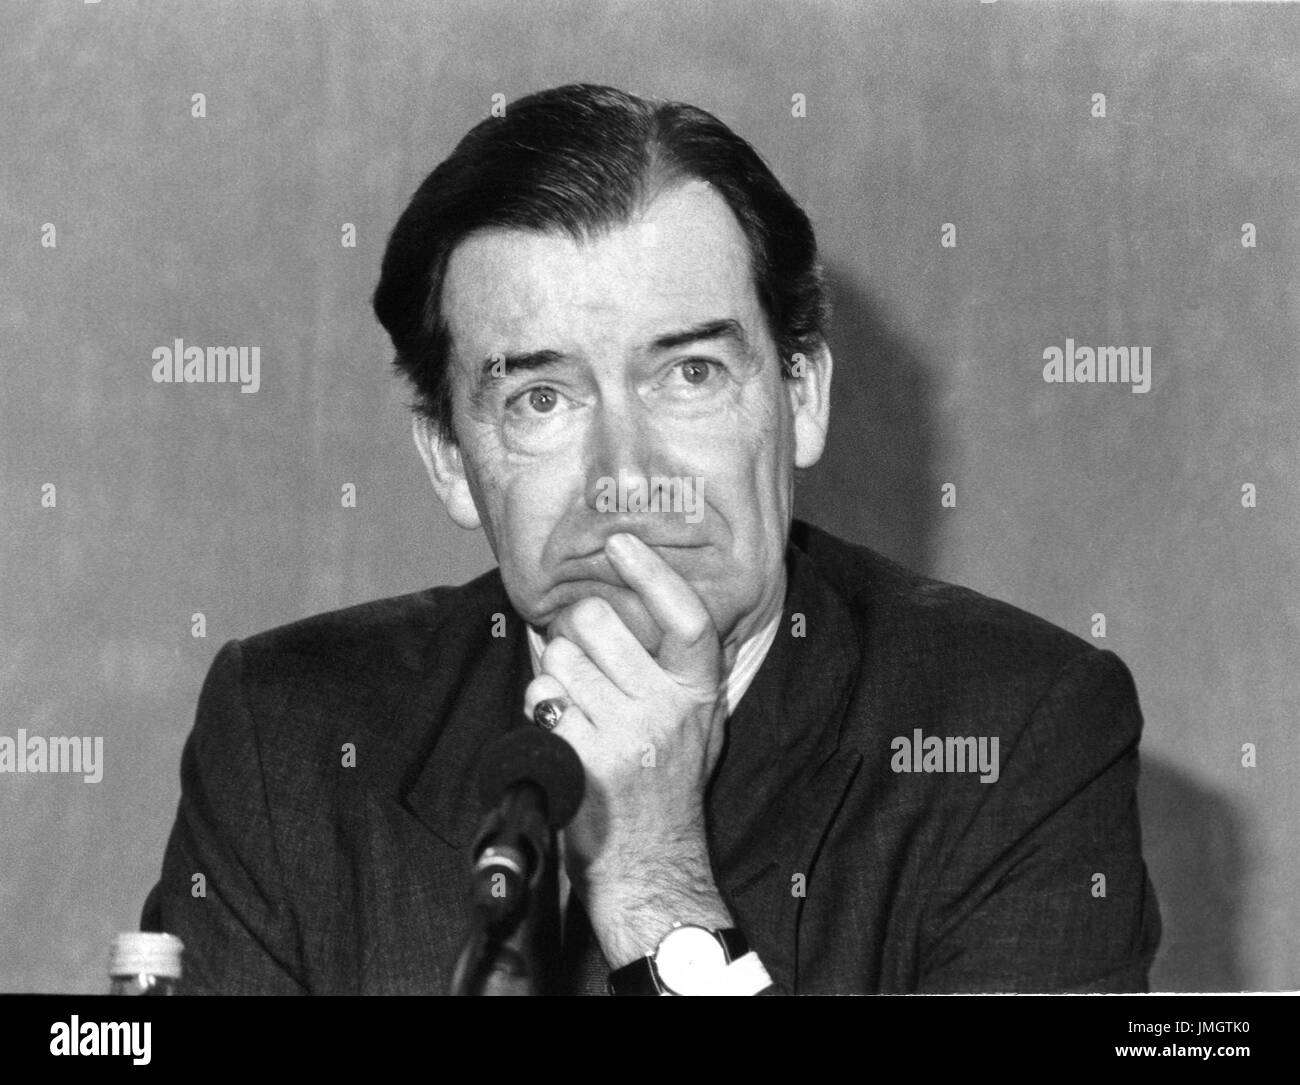 Rt. Hon. Ian Lang, Secretary of State for Scotland and Conservative party Member of Parliament for Galloway and Upper Nithsdale, attends a party press conference in London, England on February 26, 1992. Stock Photo